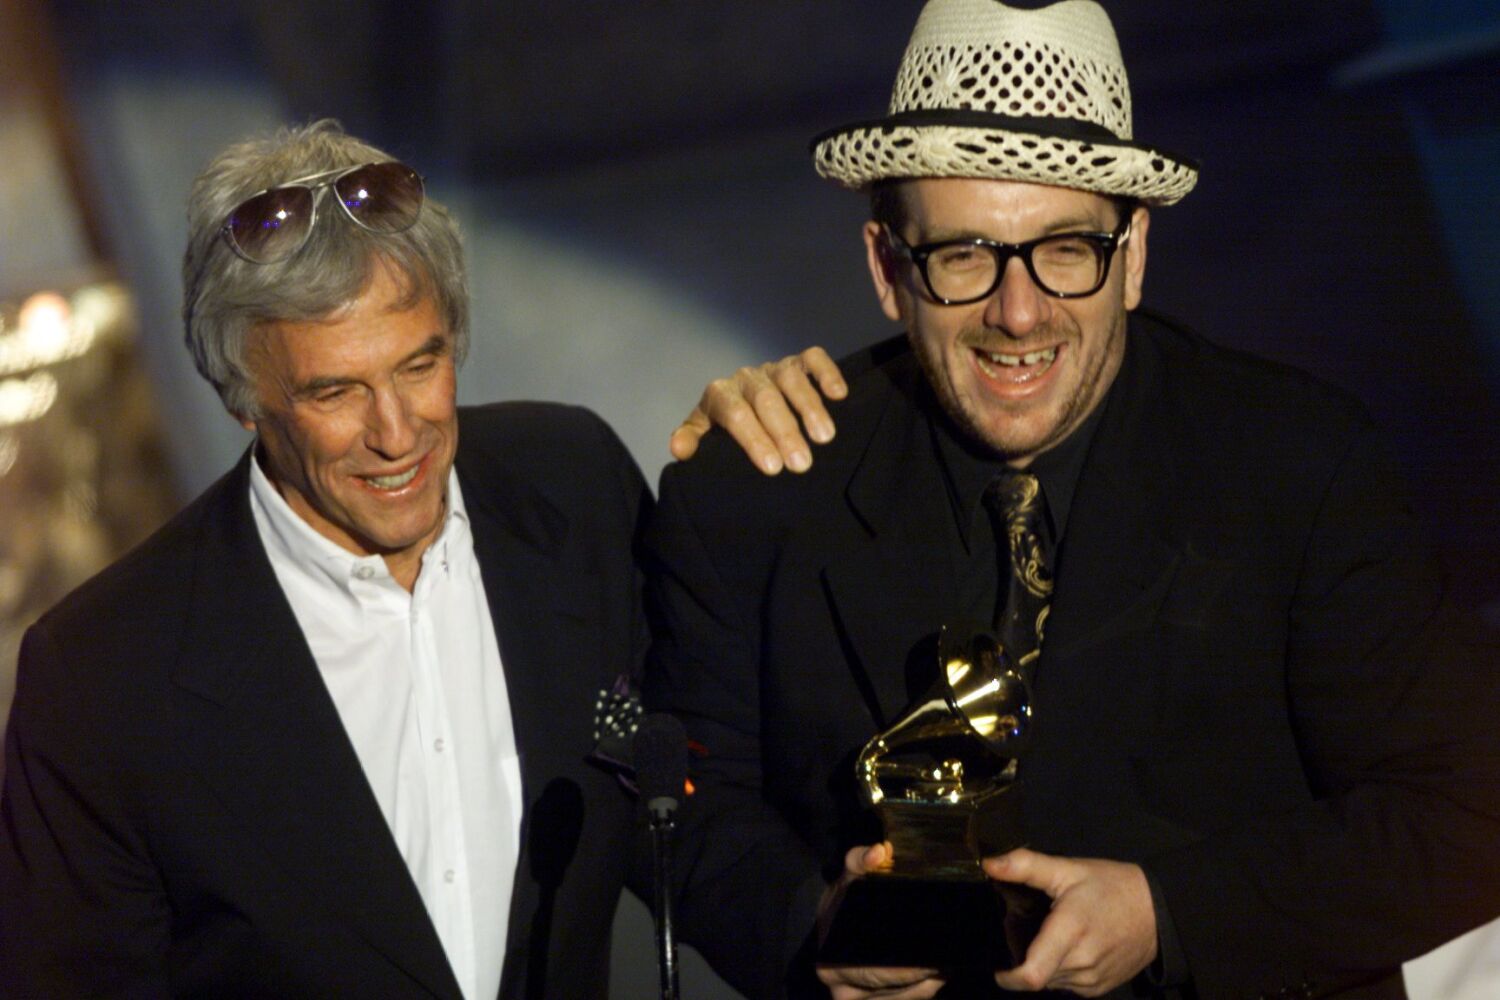 'I did love this man': Elvis Costello covers three Burt Bacharach songs at Gramercy 